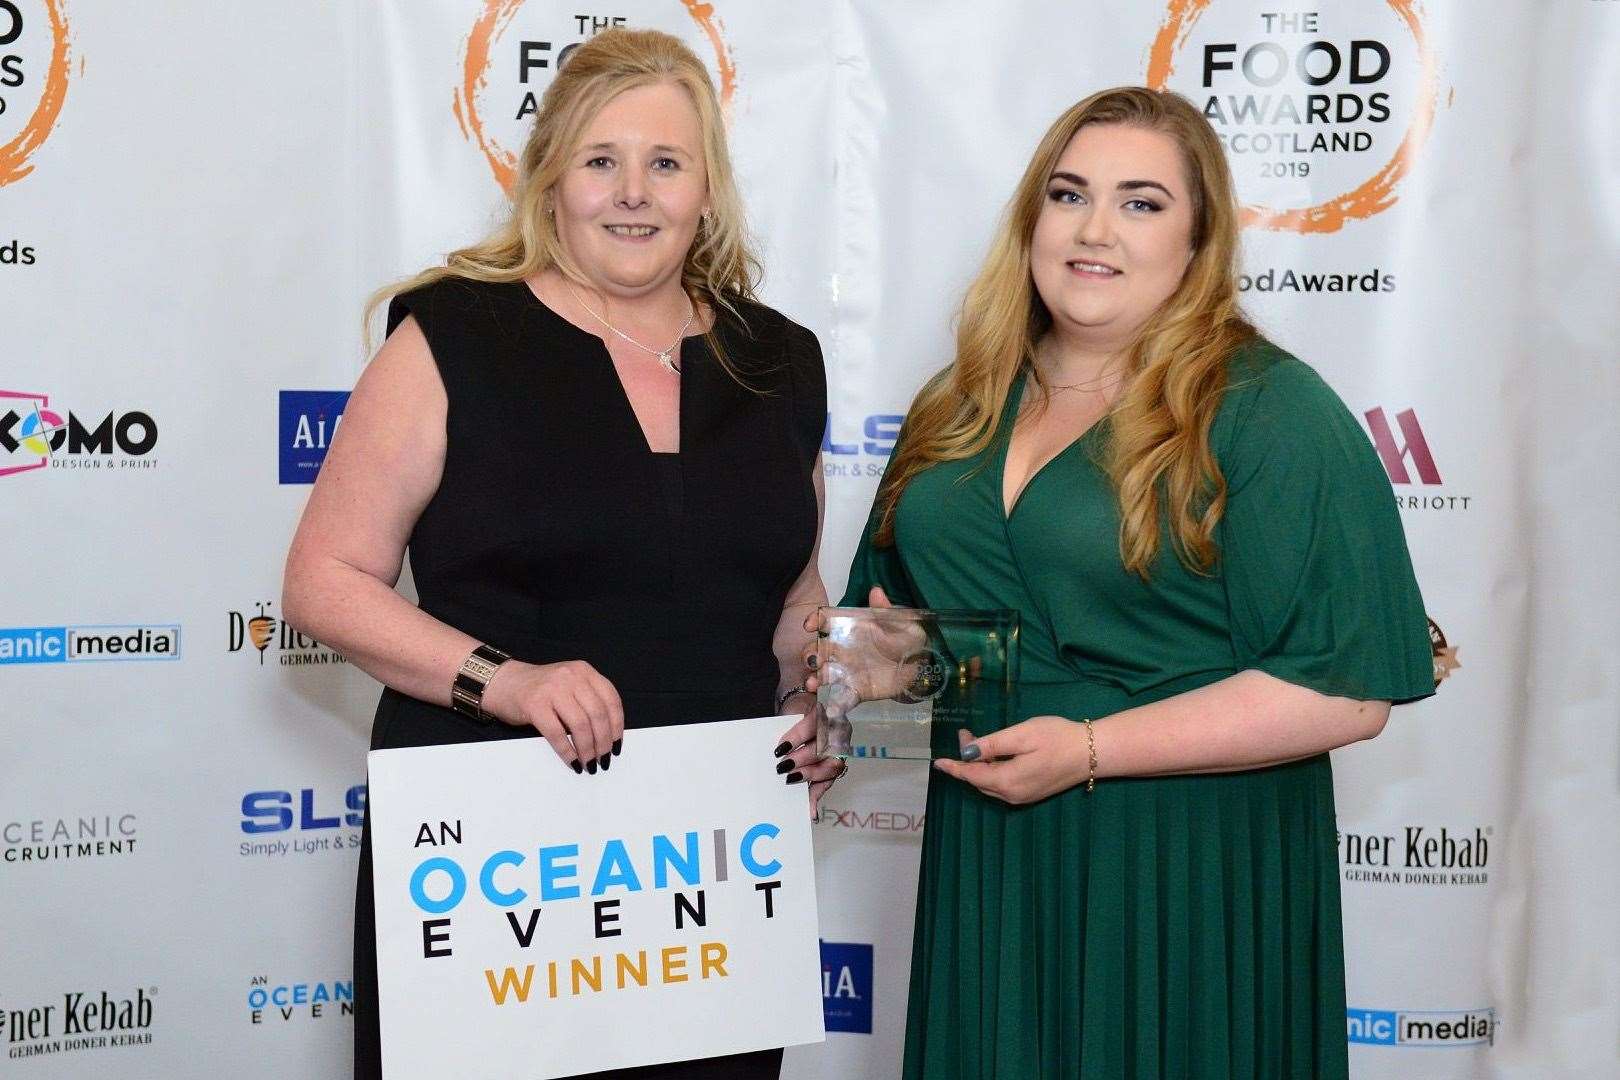 Company director Sharon Hosie and admin assistant Aenea Petrie picking up the award at the ceremony in Glasgow.